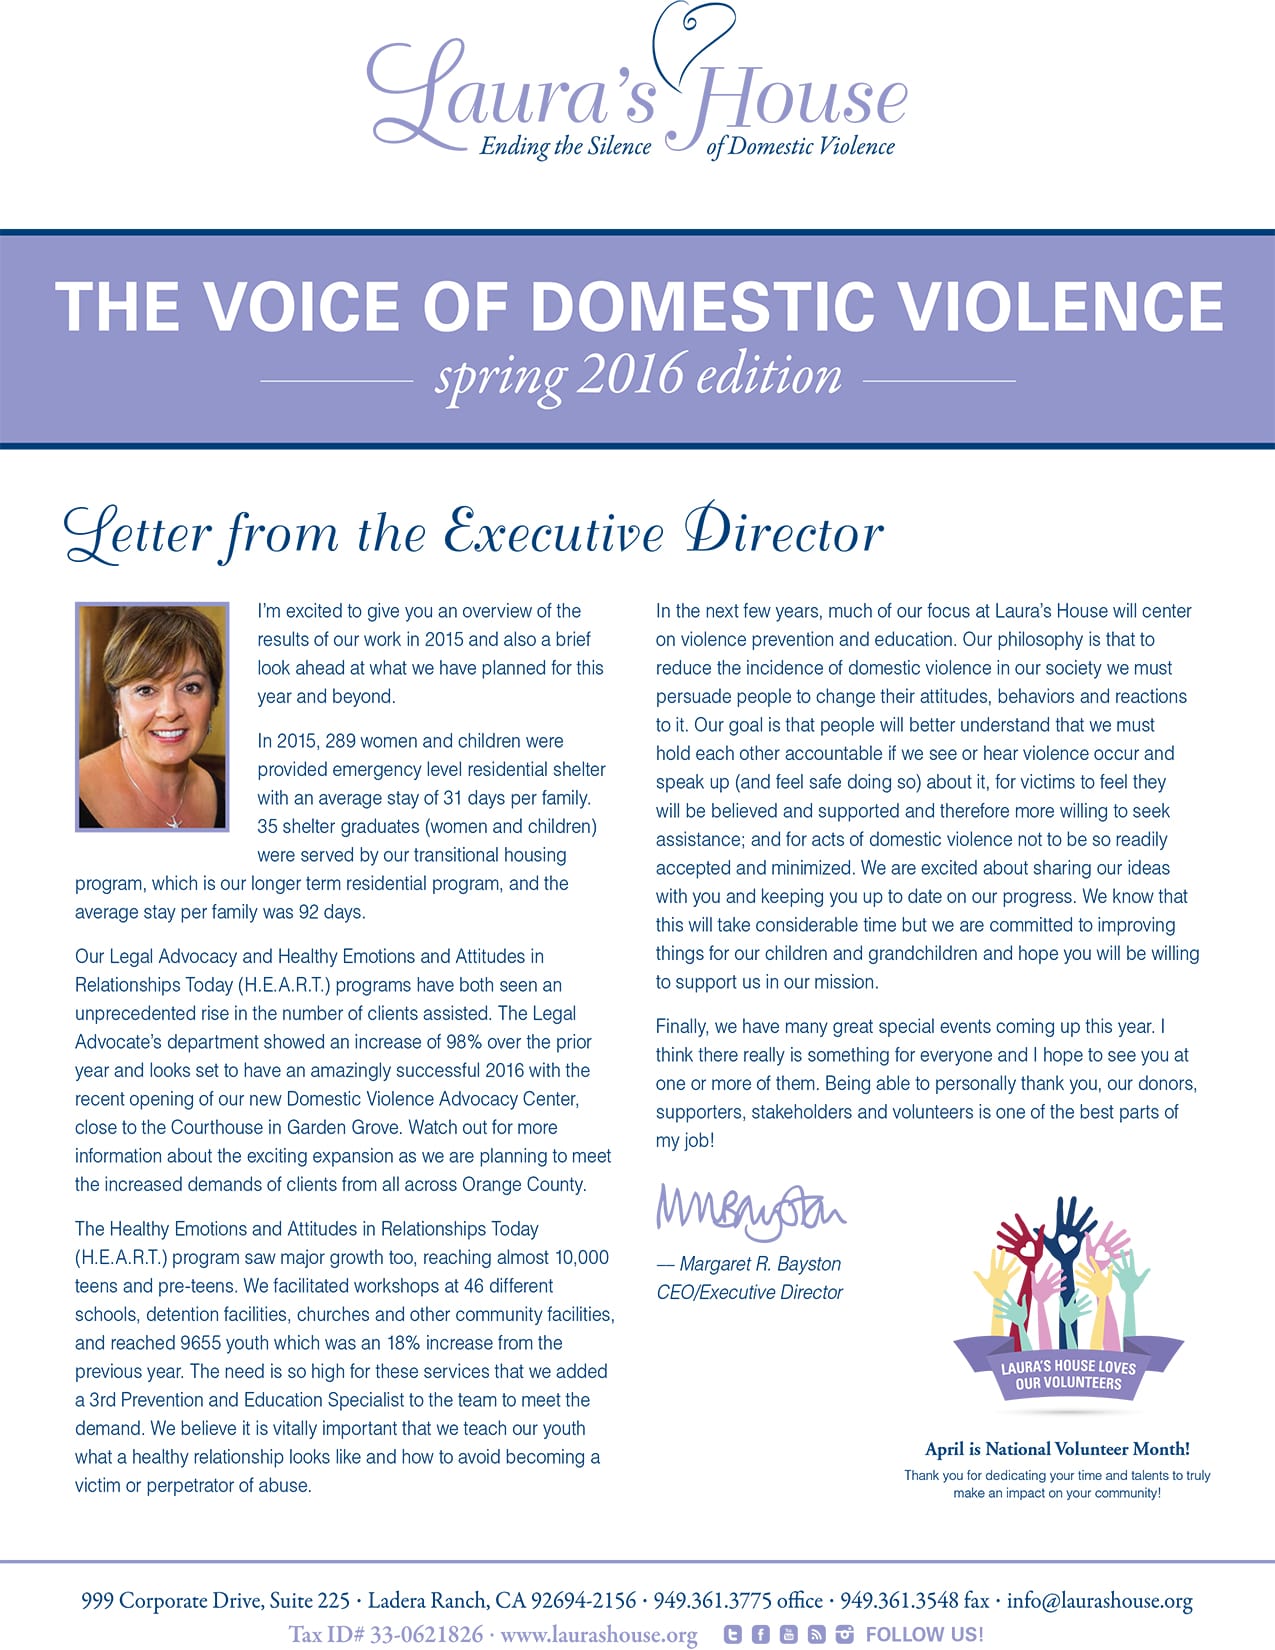 The Voice of Domestic Violence - spring 2016 edition